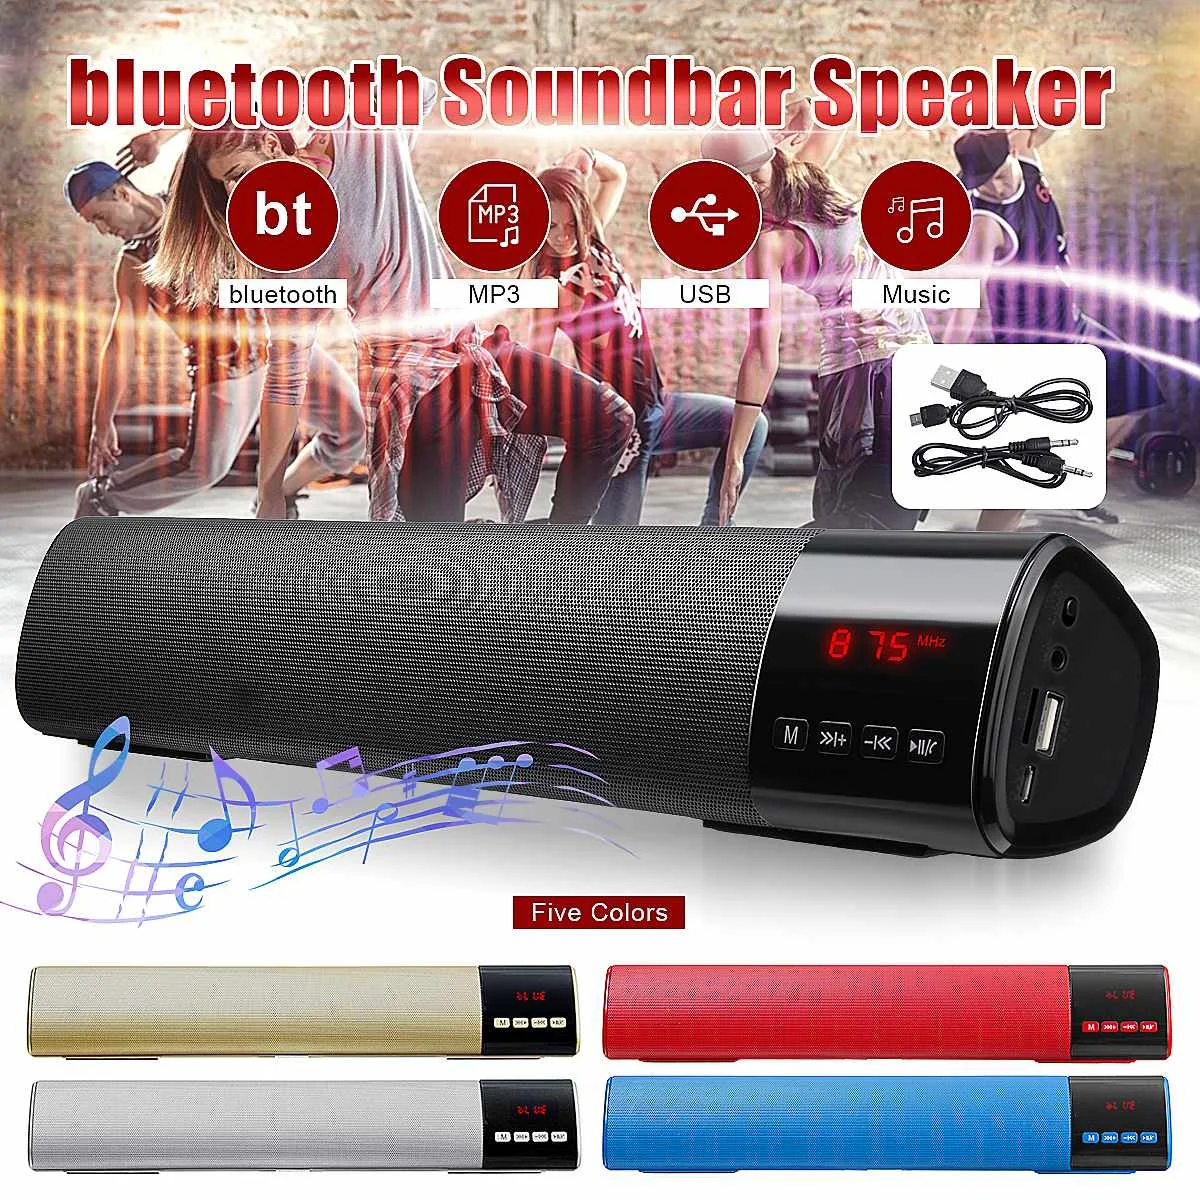 

3D Surround Soundbar Bluetooth 5.0 Speaker Wired Computer Speakers Stereo Subwoofer Sound bar for Laptop PC Theater TV 1200 mAh